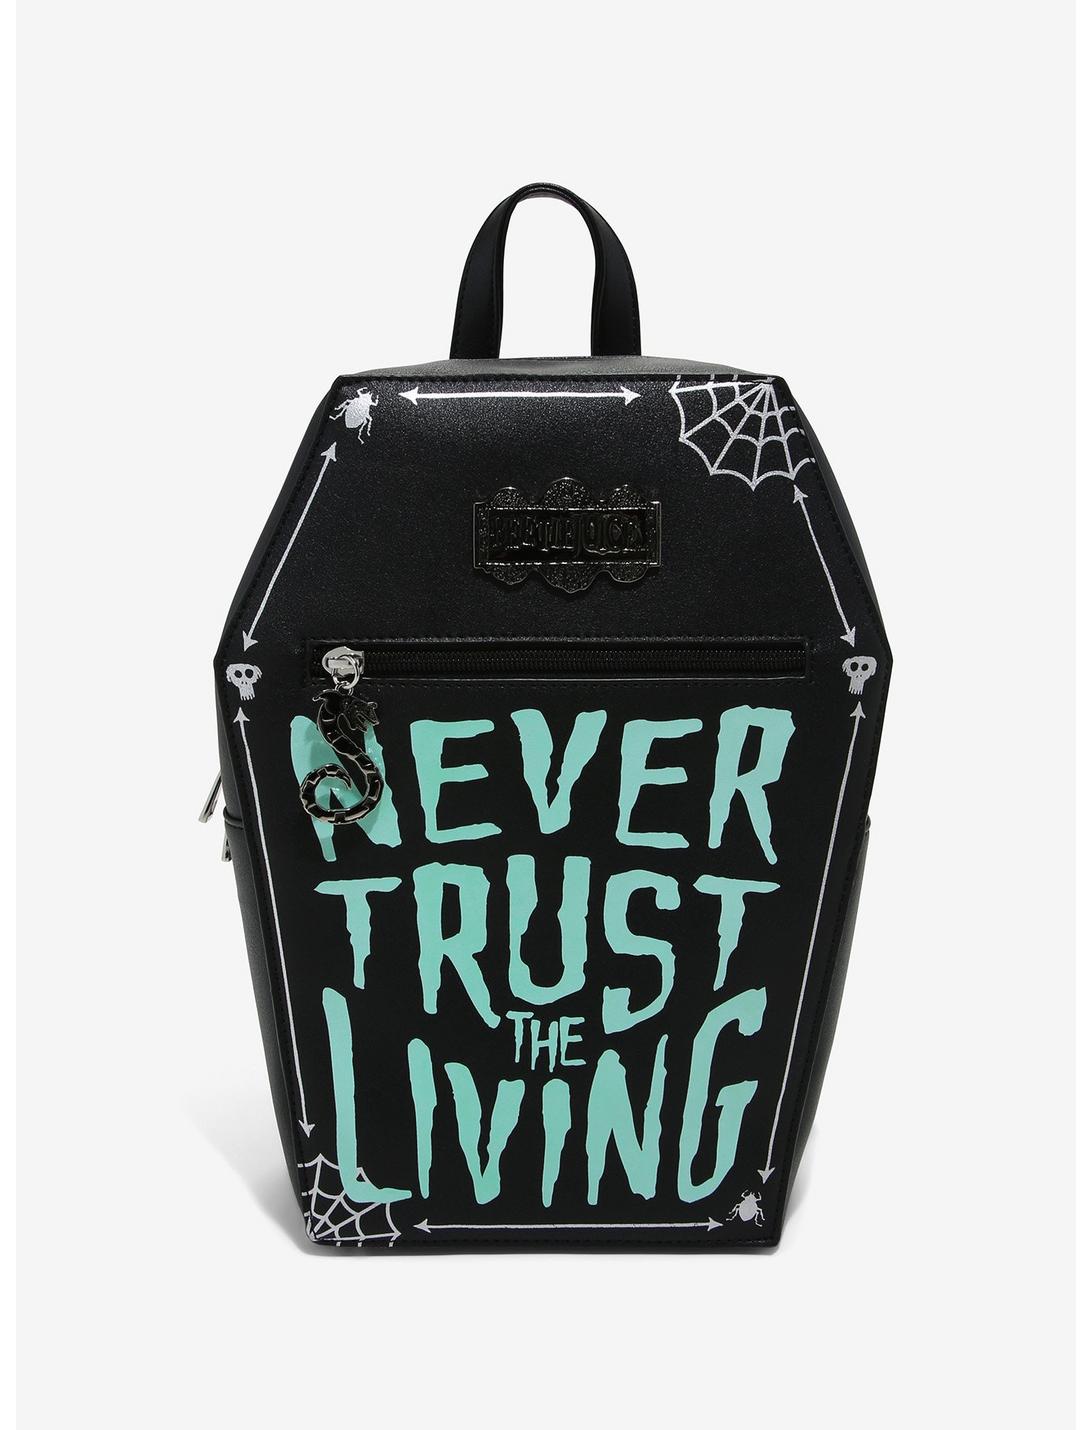 Beetlejuice Never Trust The Living Glow-In-The-Dark Coffin Mini Backpack, , hi-res